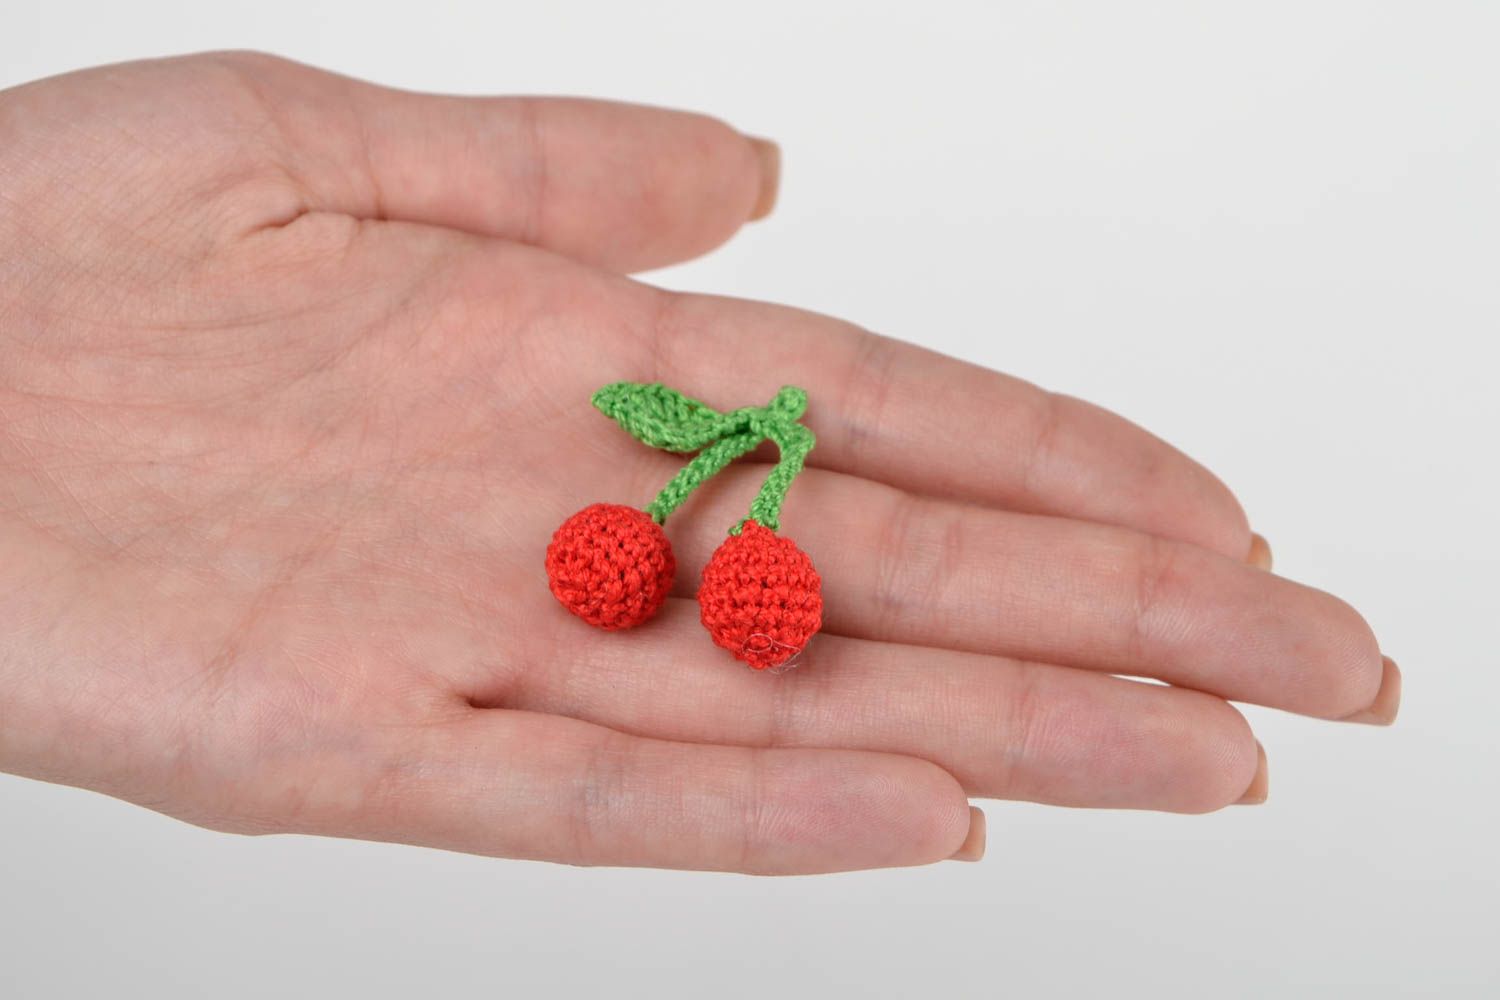 Handmade toy fruit toy unusual toys for children crocheted toy gift ideas photo 2